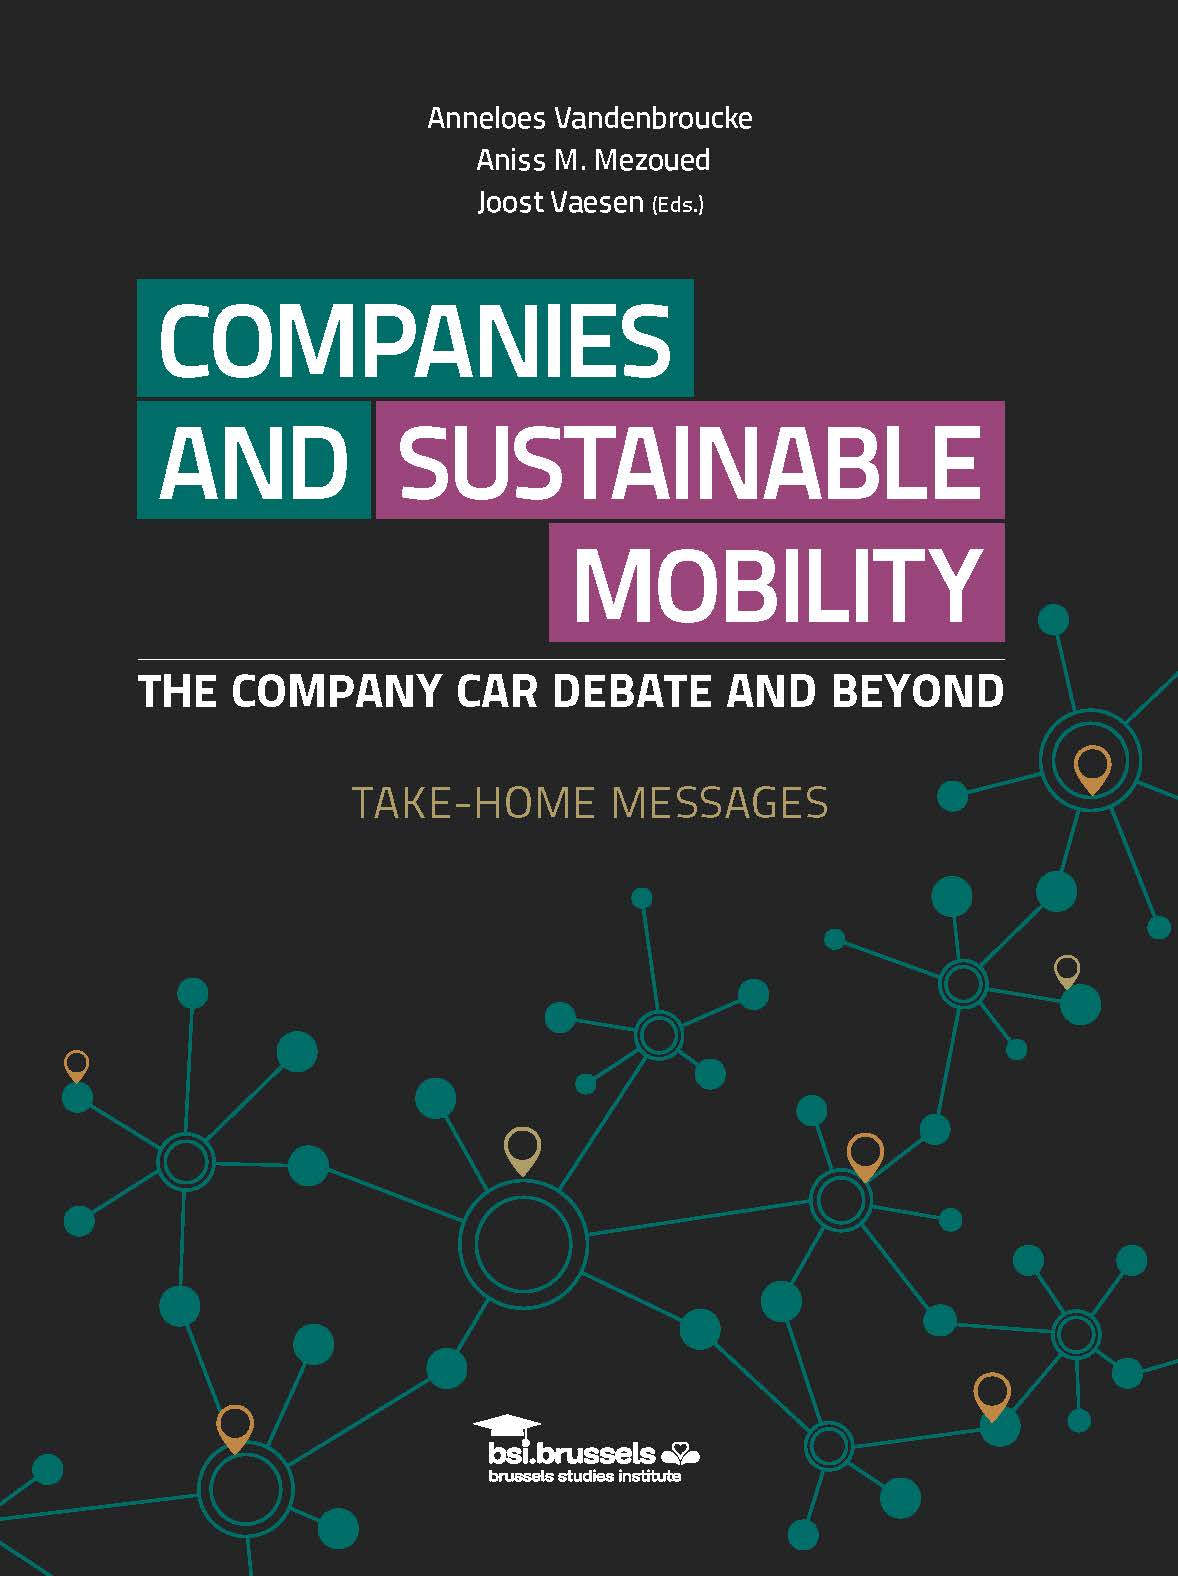 COMPANIES AND SUSTAINABLE MOBILITY